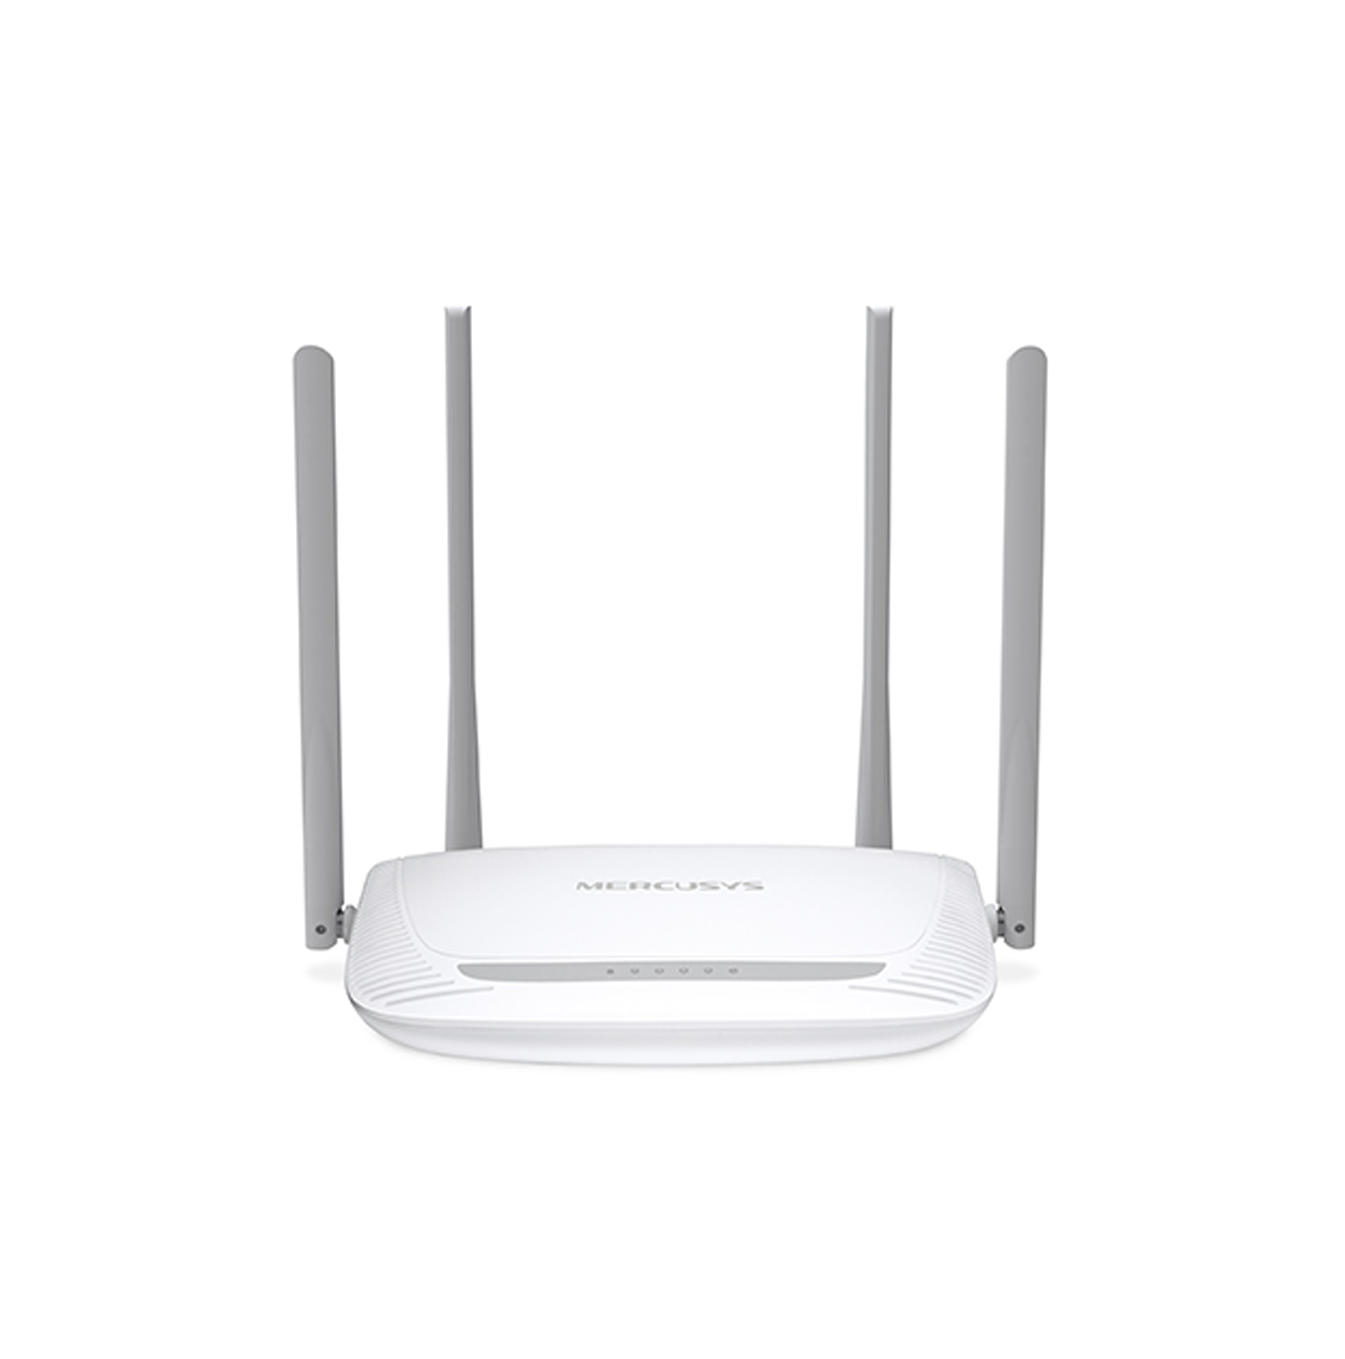 Router inalámbrico 300MBPS MW325R (EU) Marca: Mercusys By TP-Link